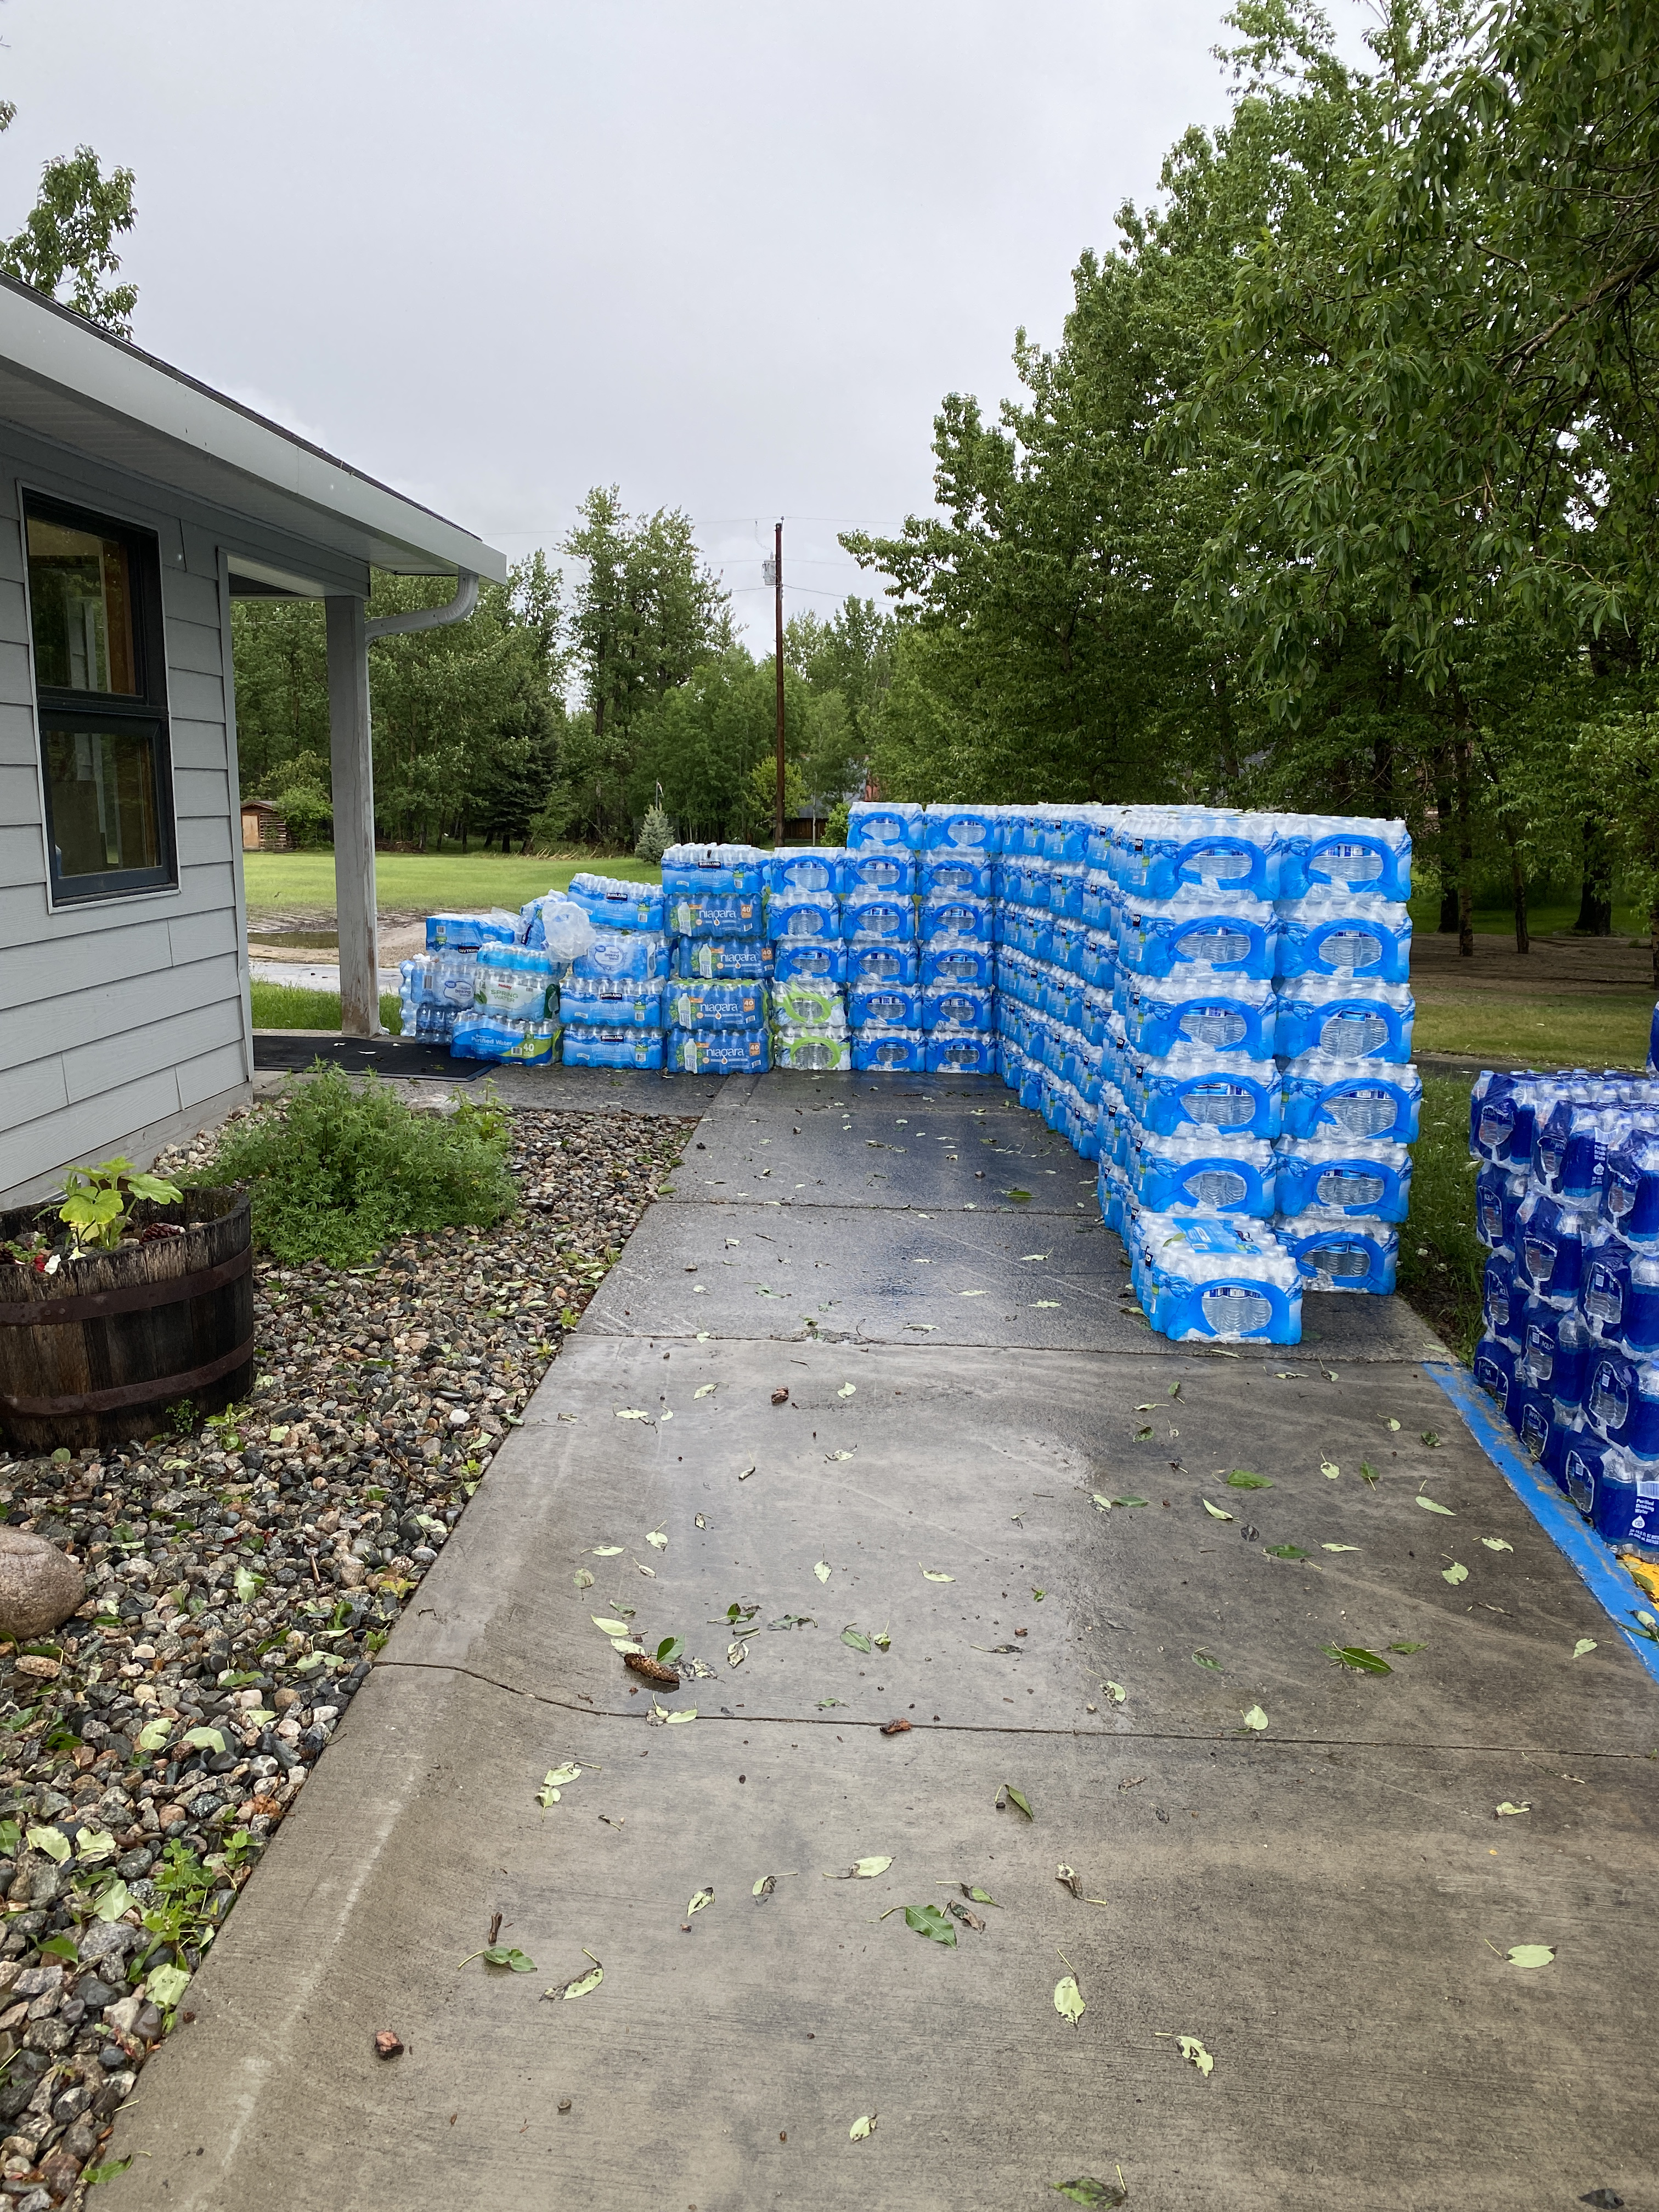 Cases of water stacked near a building on concrete sidewalk